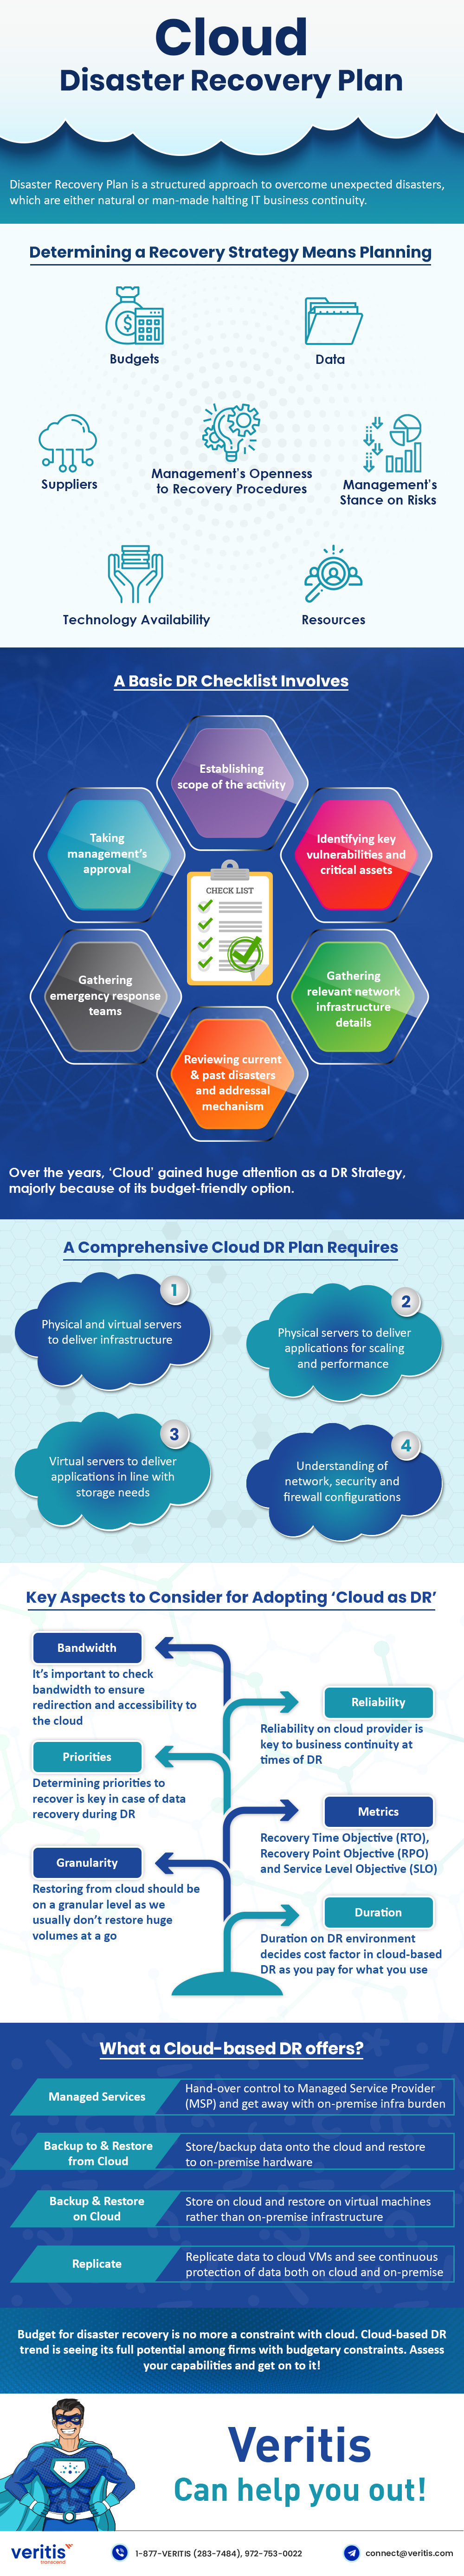 Cloud-Based Disaster Recovery Plan IT Infographic